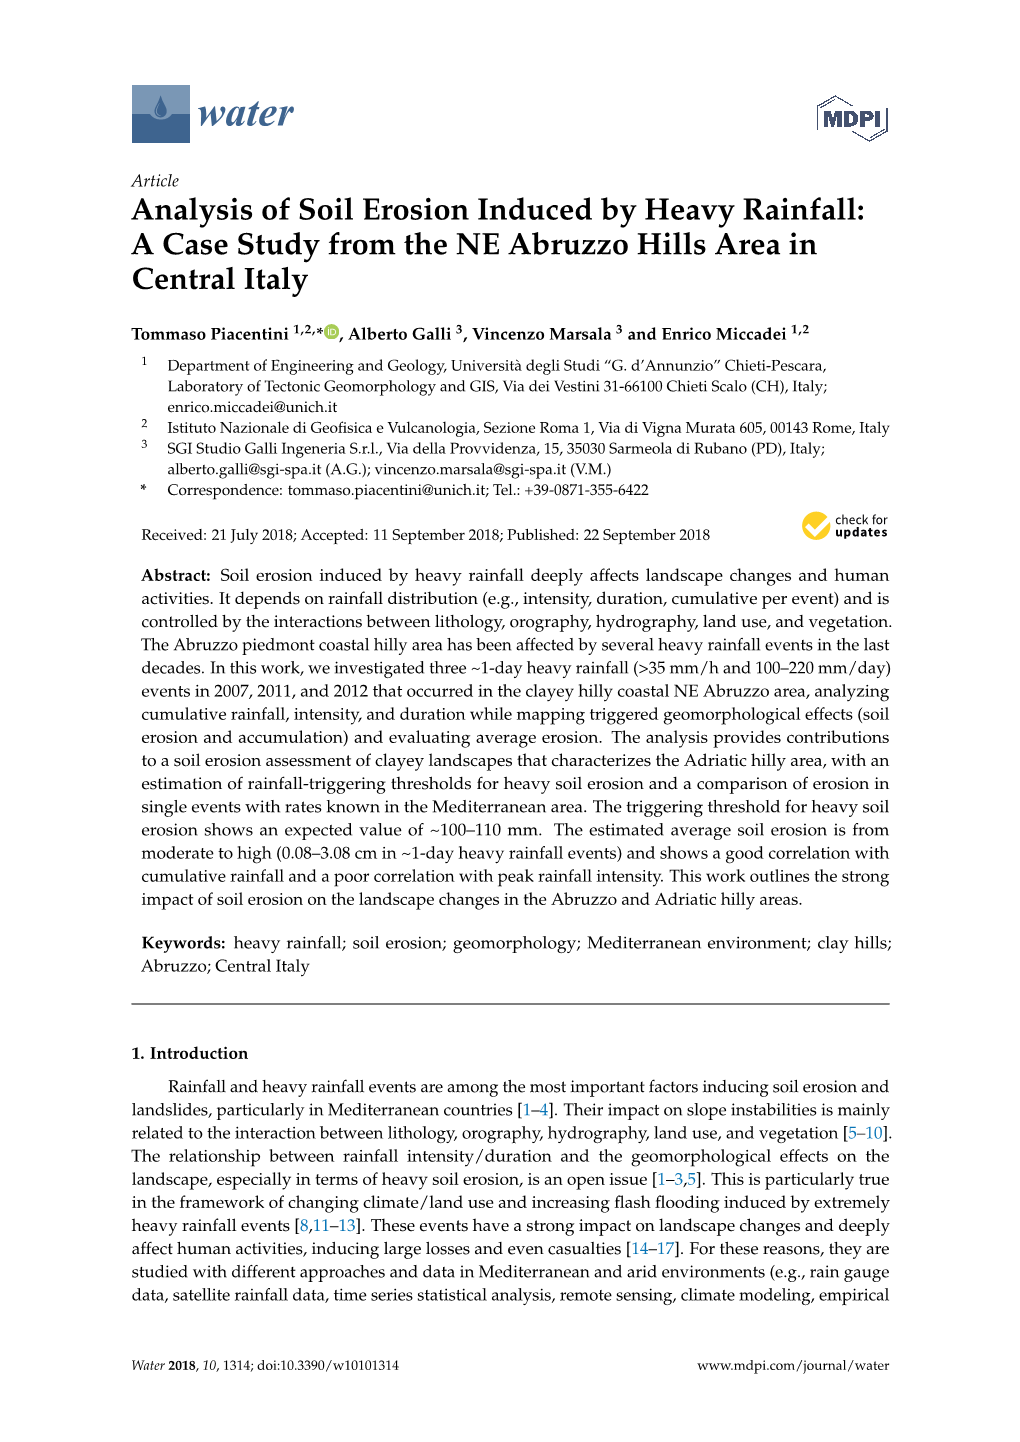 Analysis of Soil Erosion Induced by Heavy Rainfall: a Case Study from the NE Abruzzo Hills Area in Central Italy